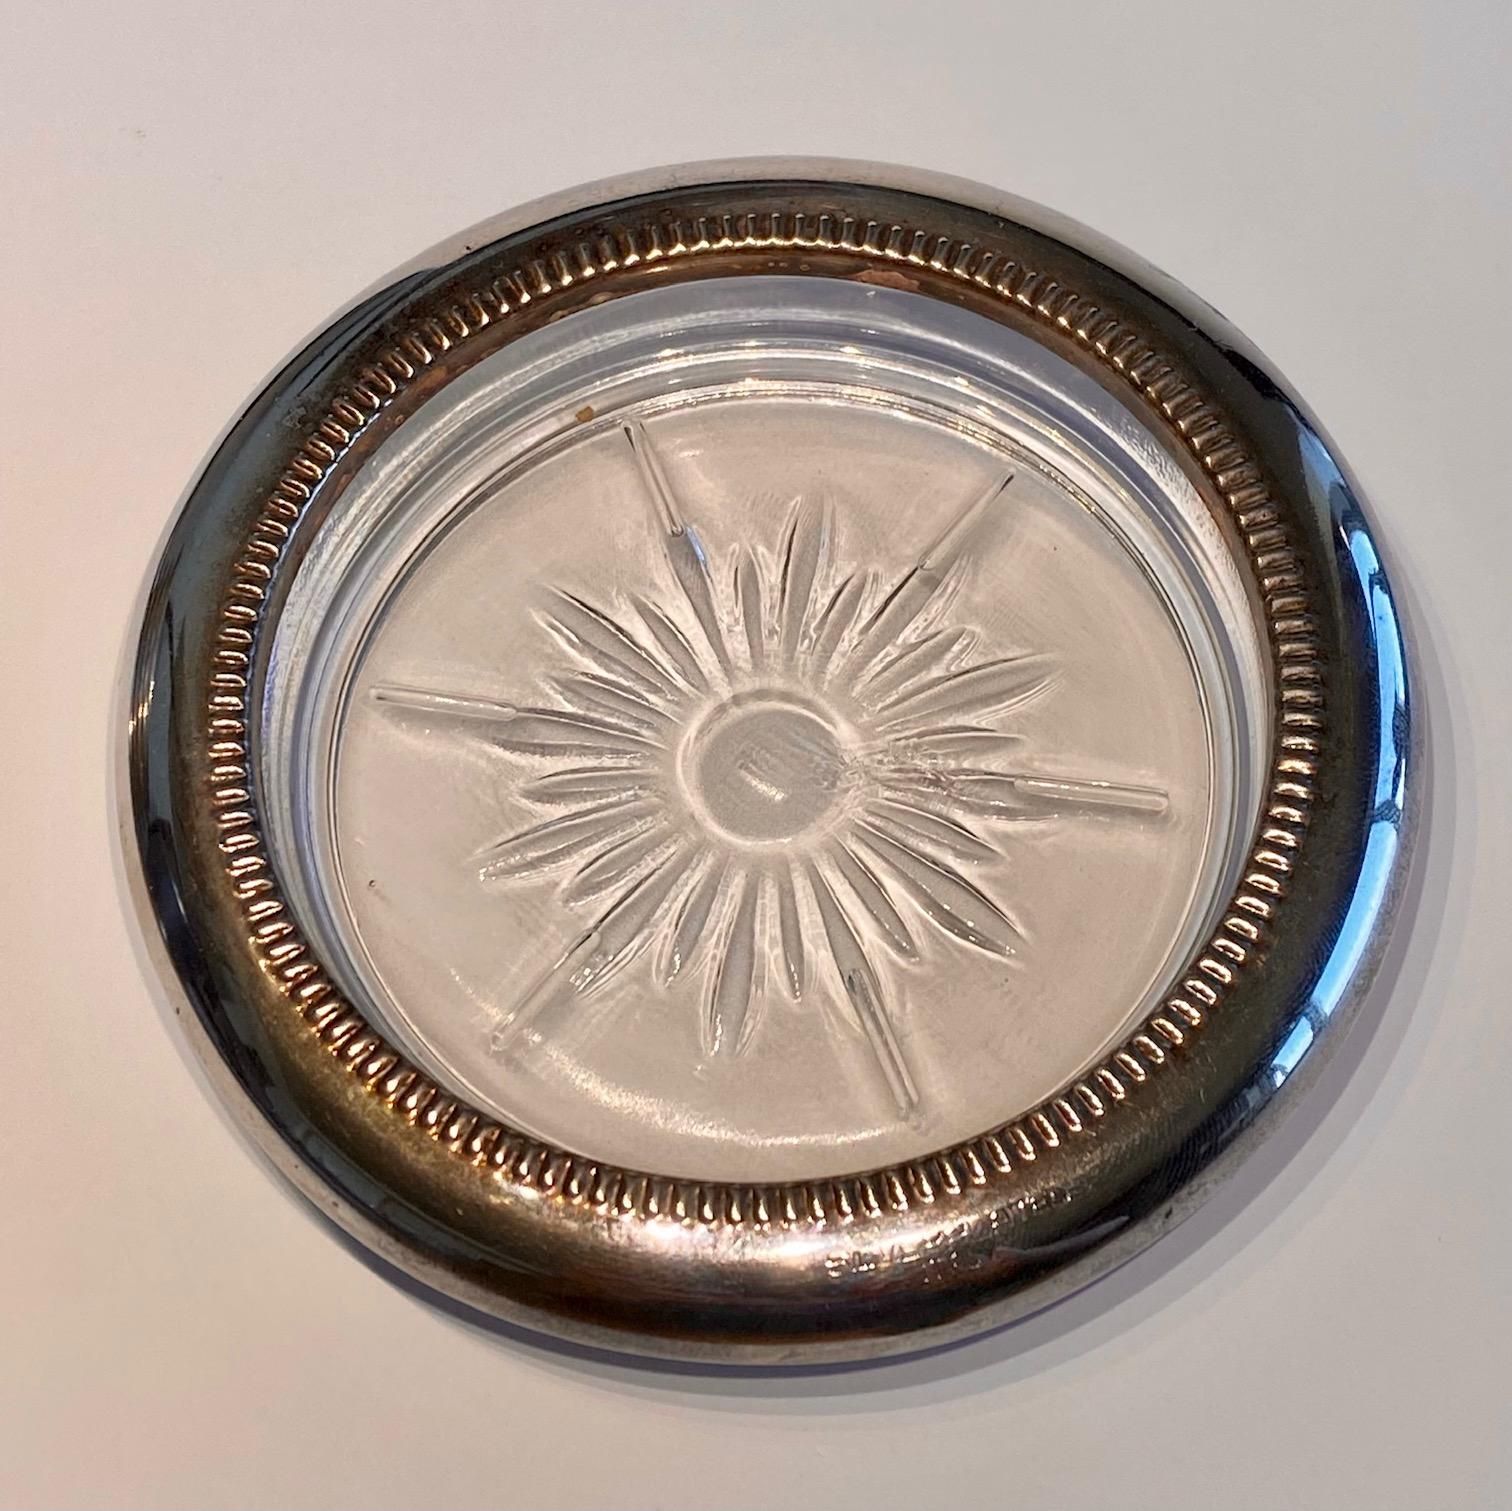 A set of 6 Crystal and Silver Plated Coasters. Mid-Century design by Frank M Whiting & Co. These are a lovely matched set of 6 with a slight patina of age. Price listed is for the set.

